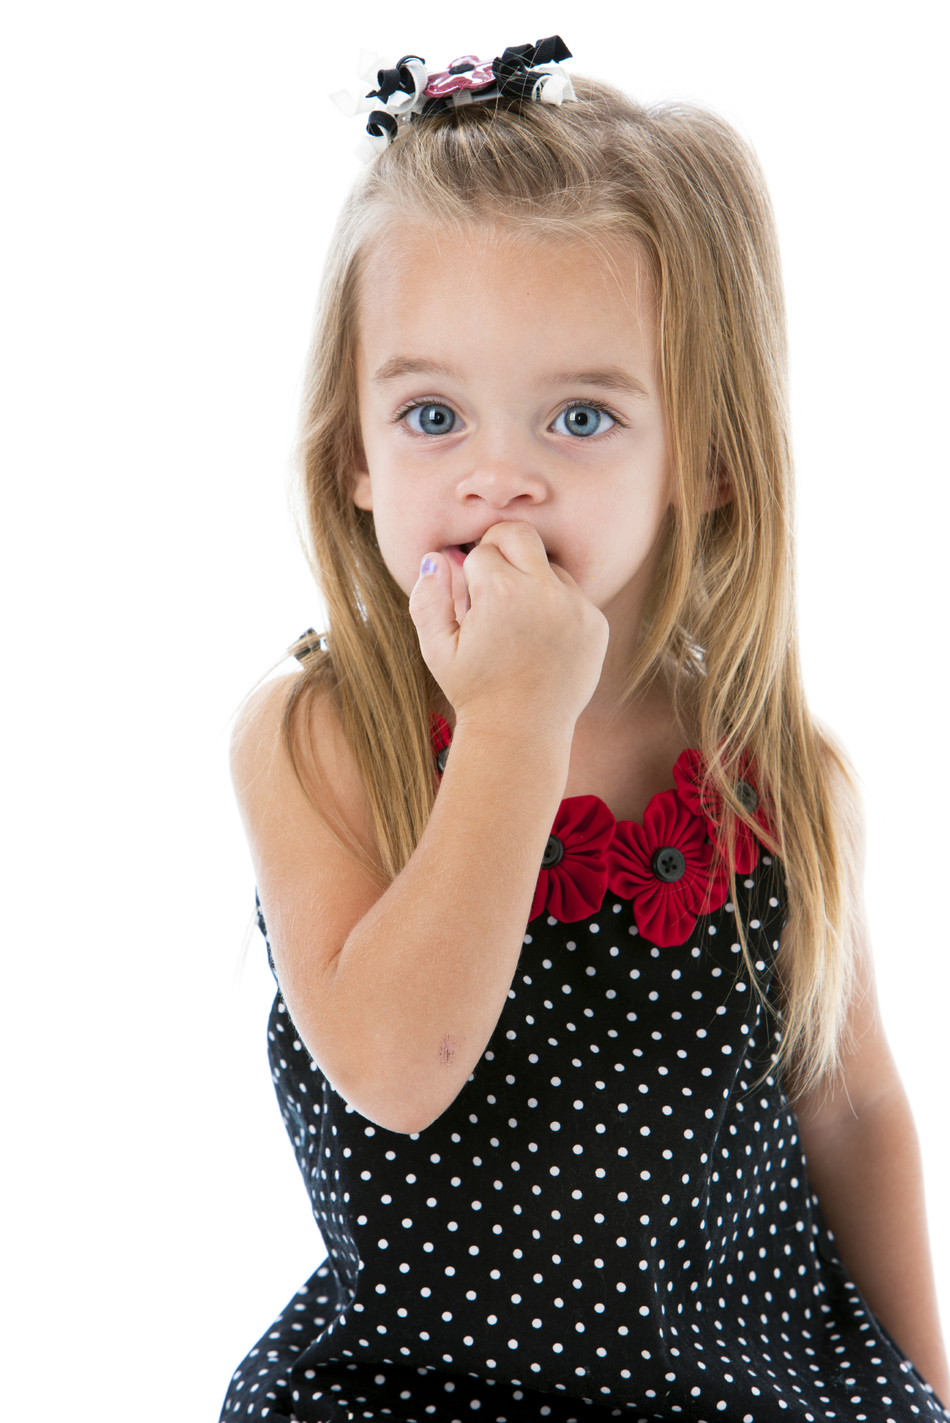 How Can I Get My Child to Stop Biting Her Nails?